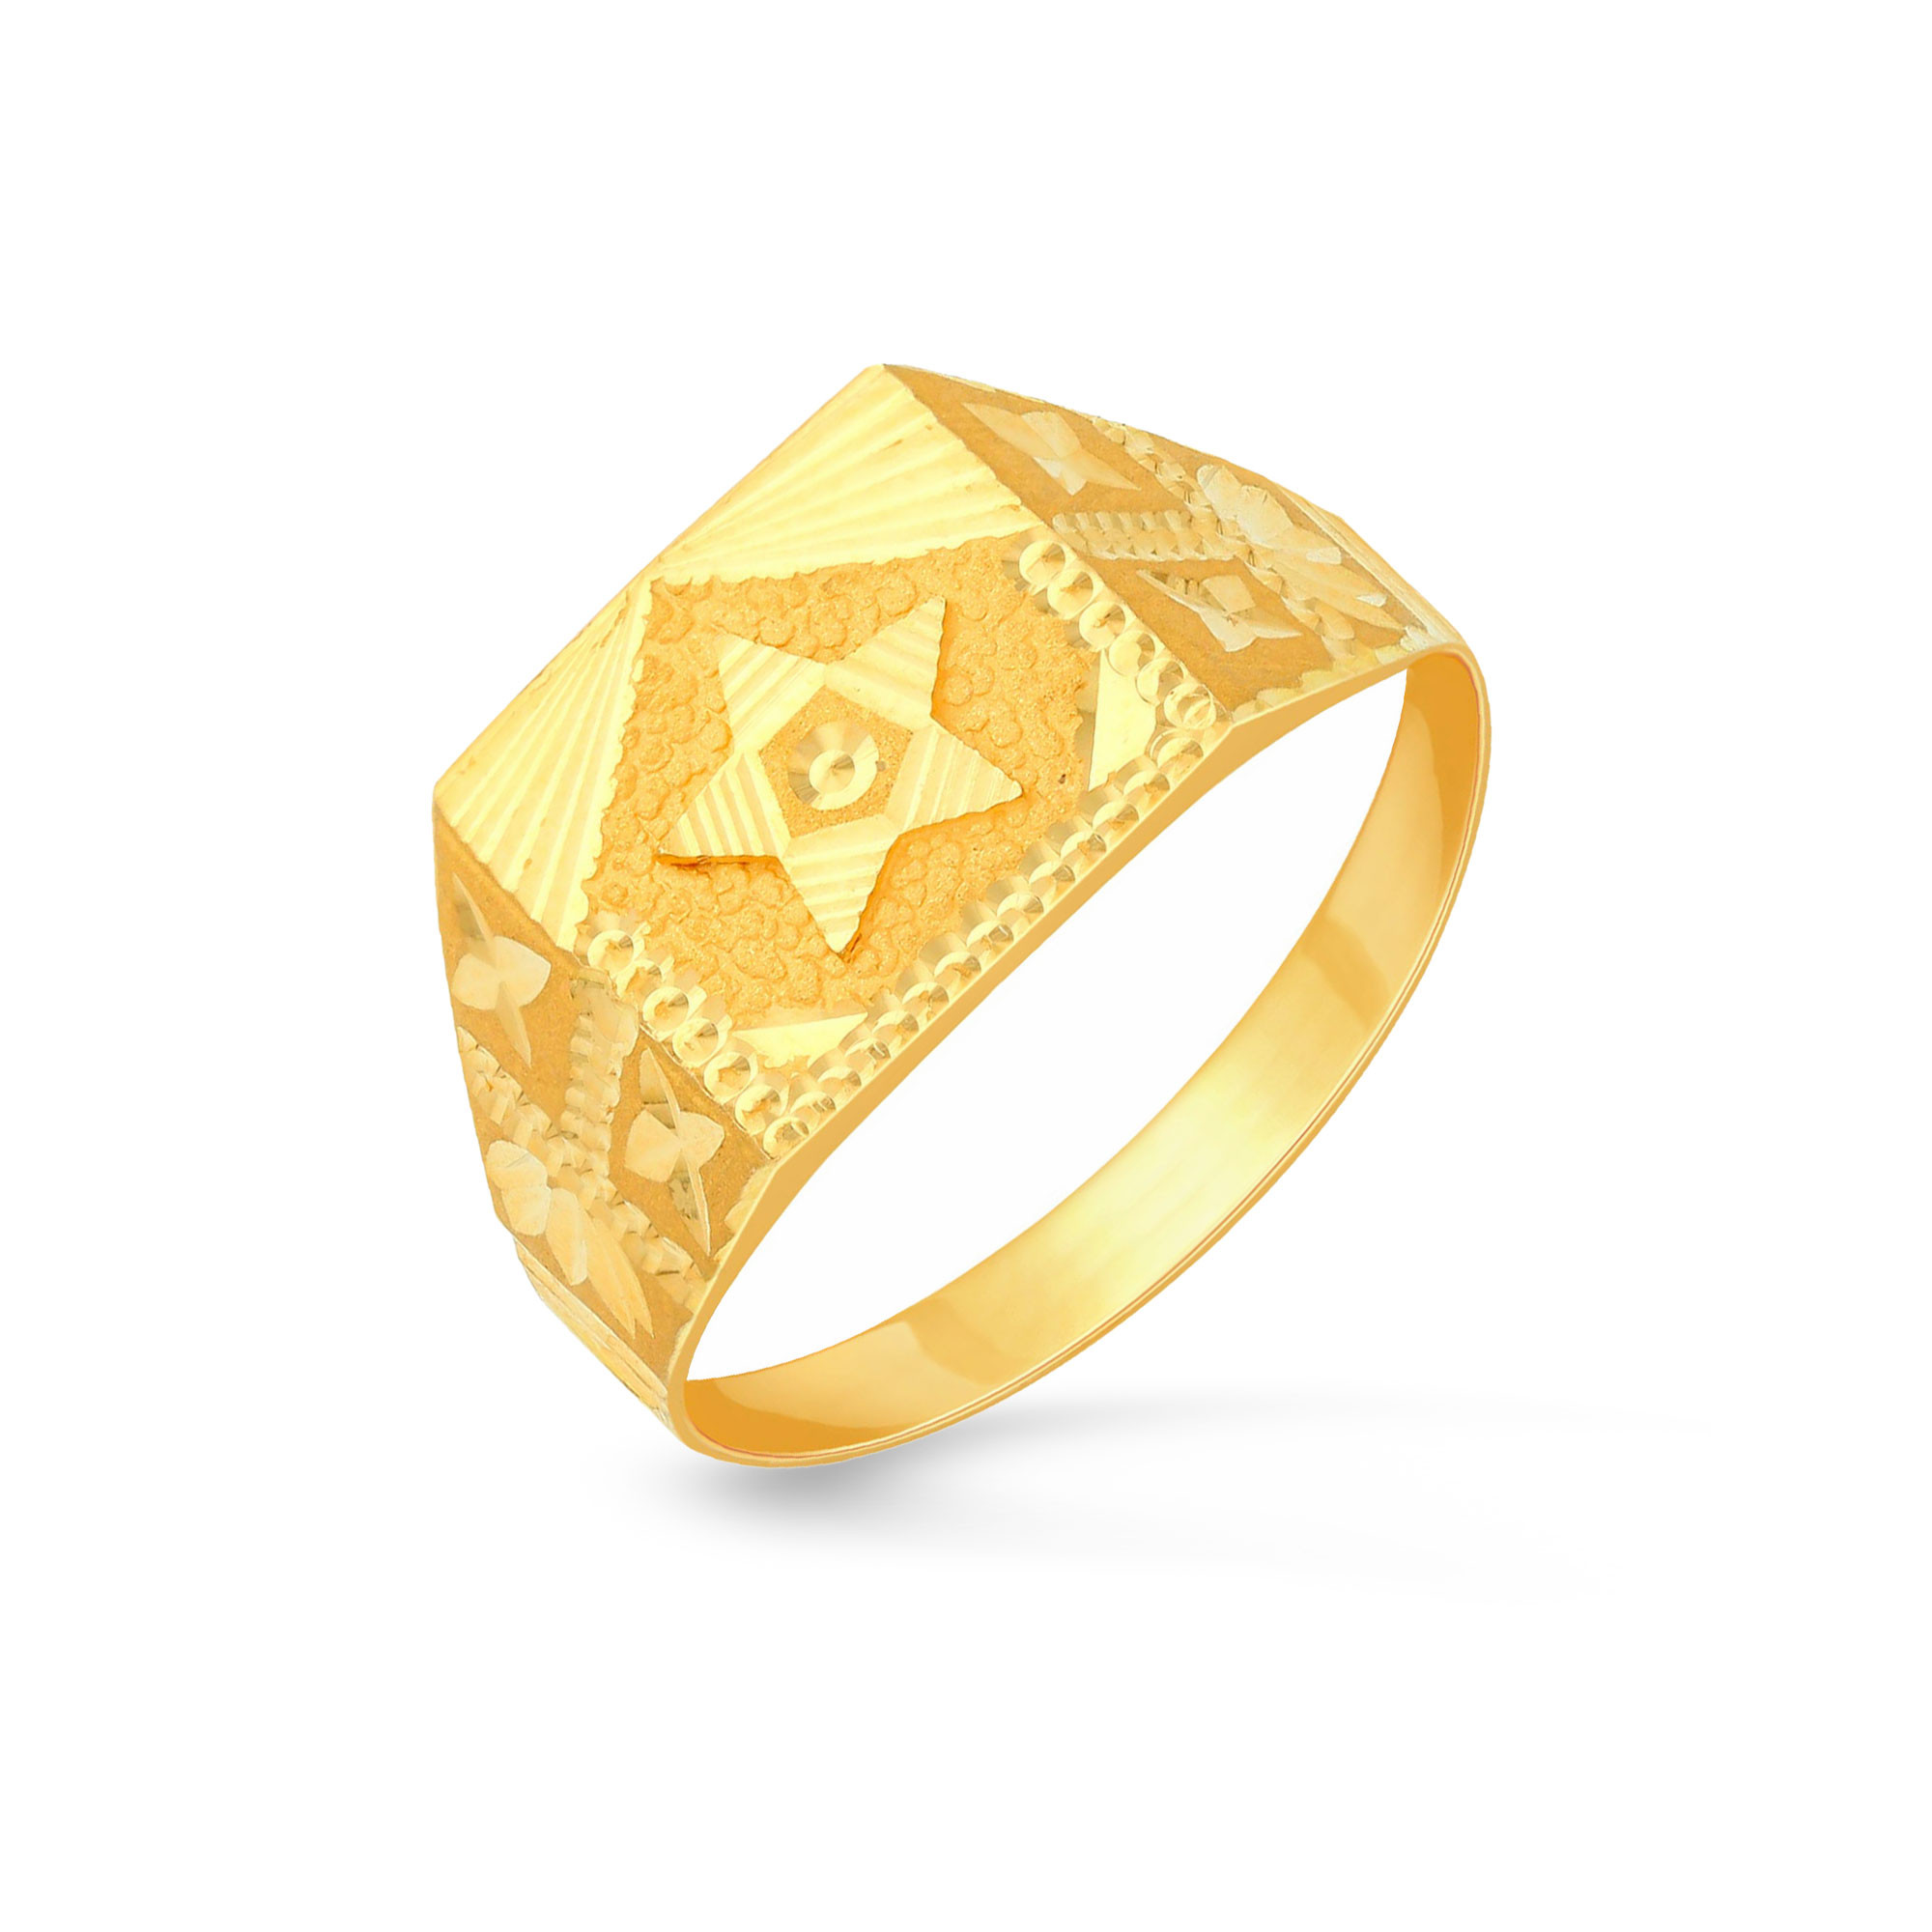 Share more than 146 boy gold ring images best